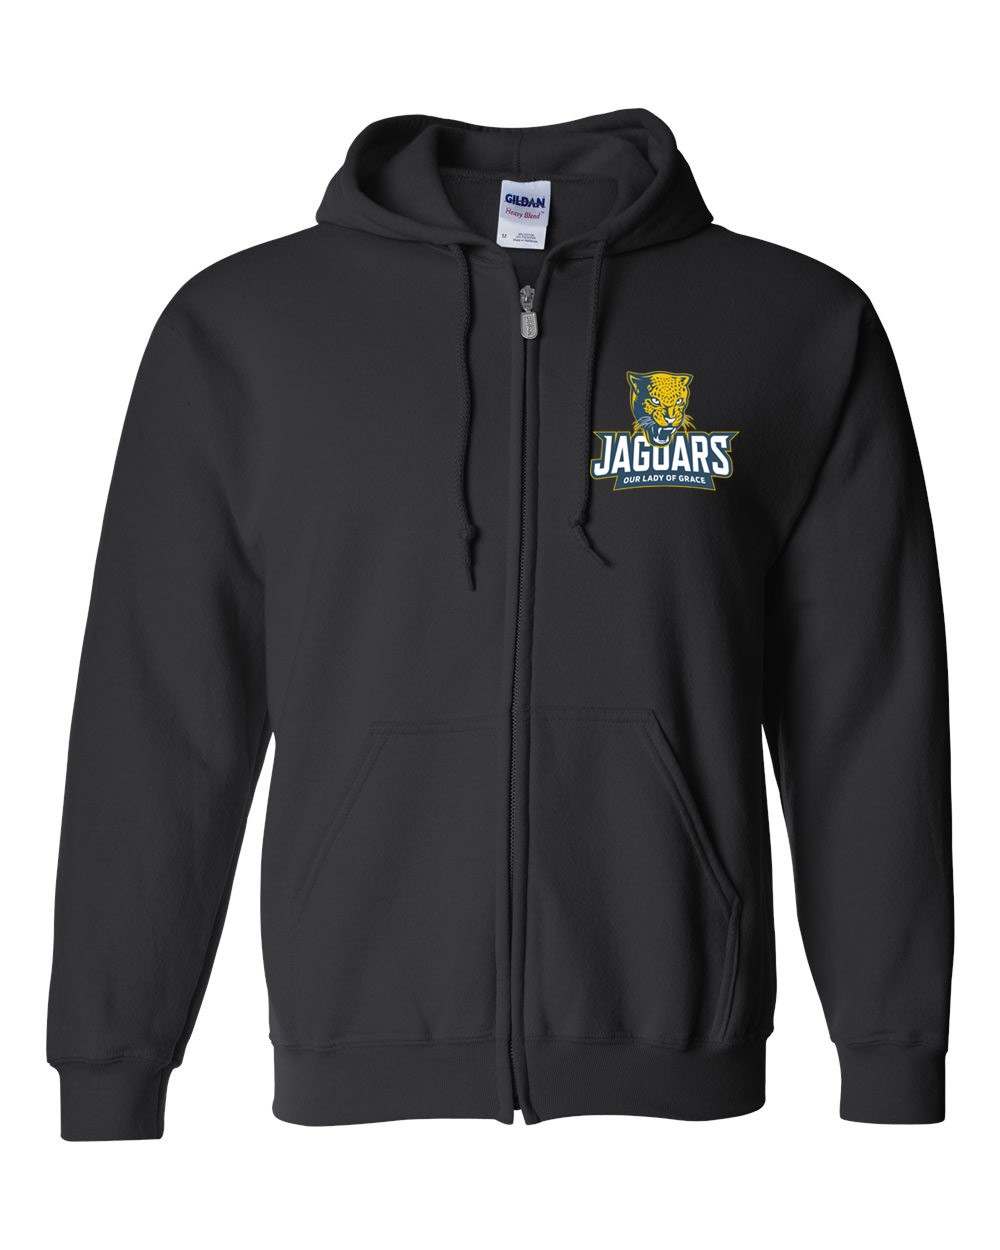 OLG Spirit Zipper Hoodie w/ Logo - Please Allow 2-3 Weeks for Delivery